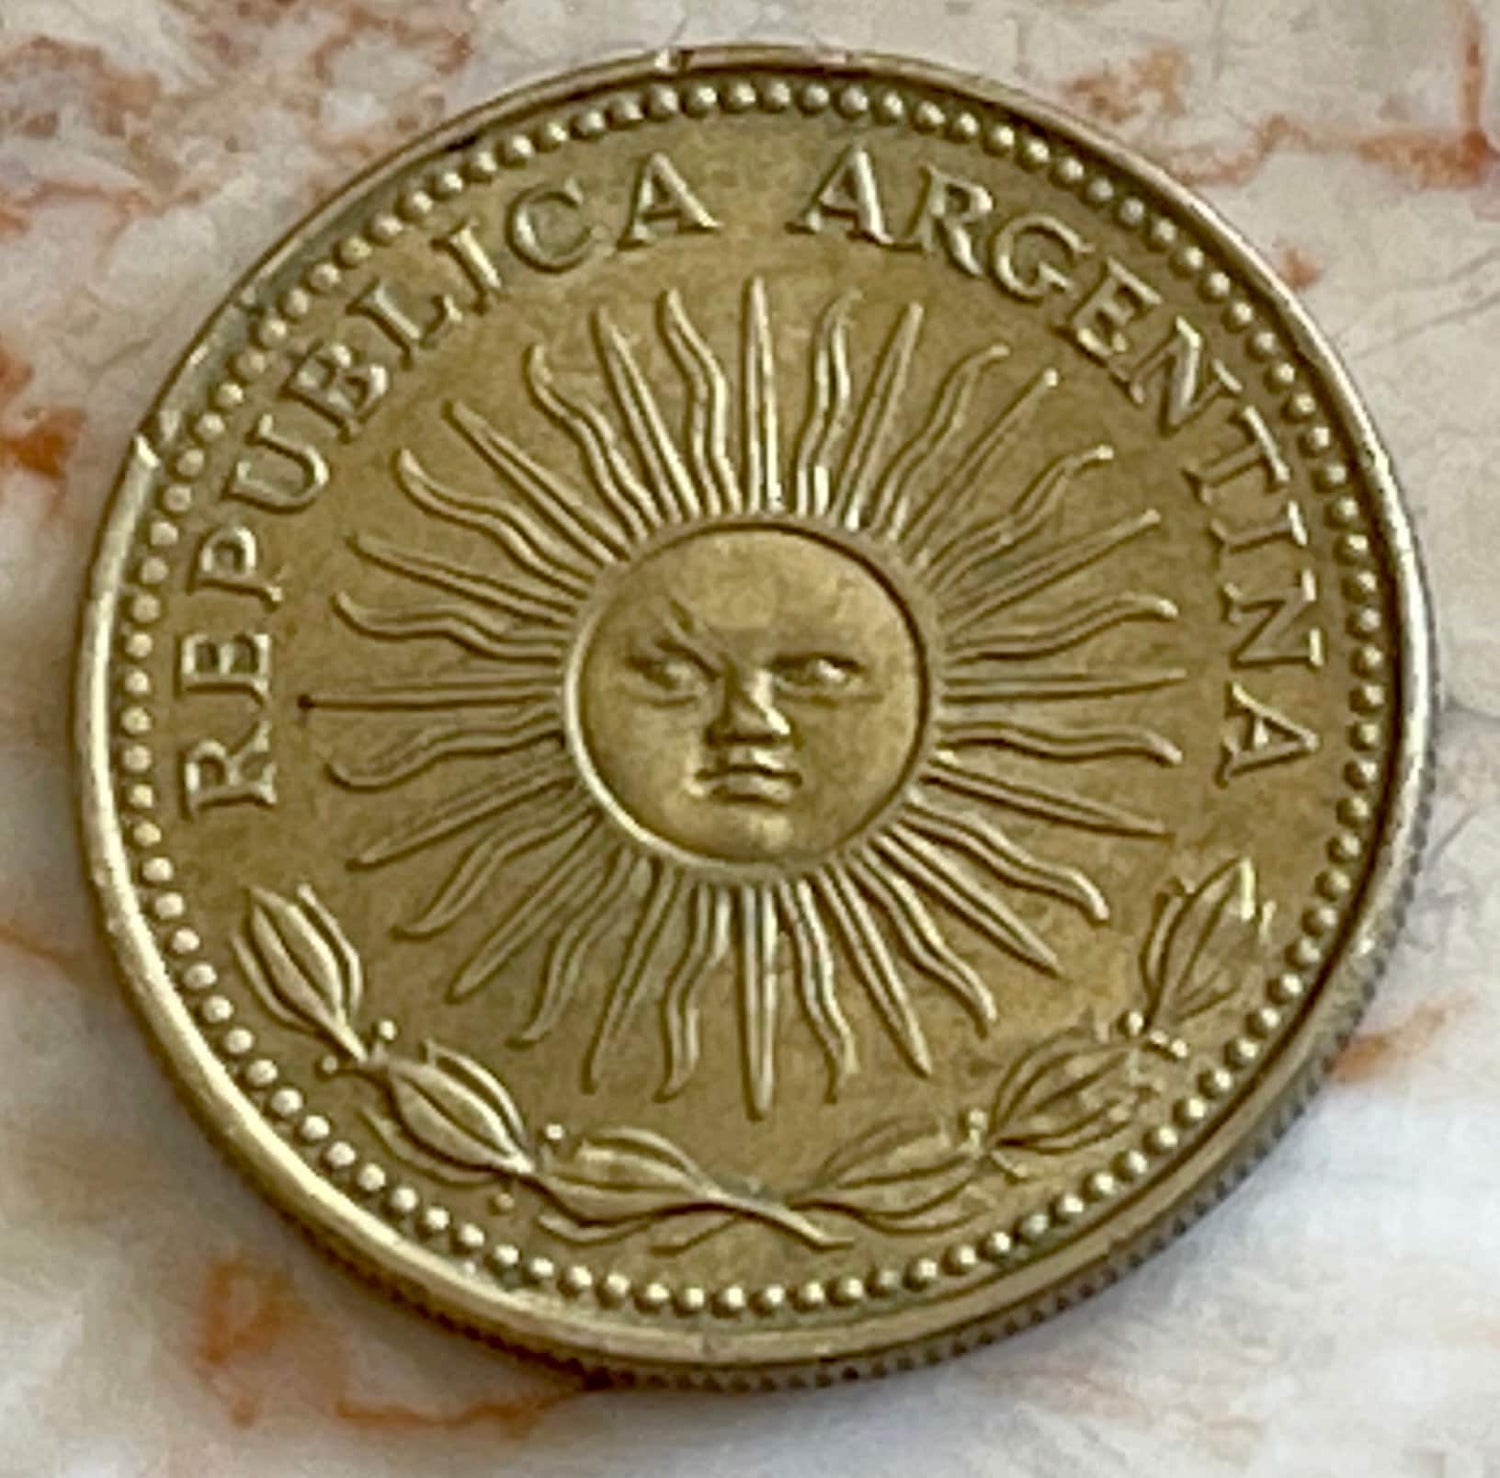 Sun of May Argentina Authentic Peso Coin Money for Jewelry and Craft Making 1974 1975 1976